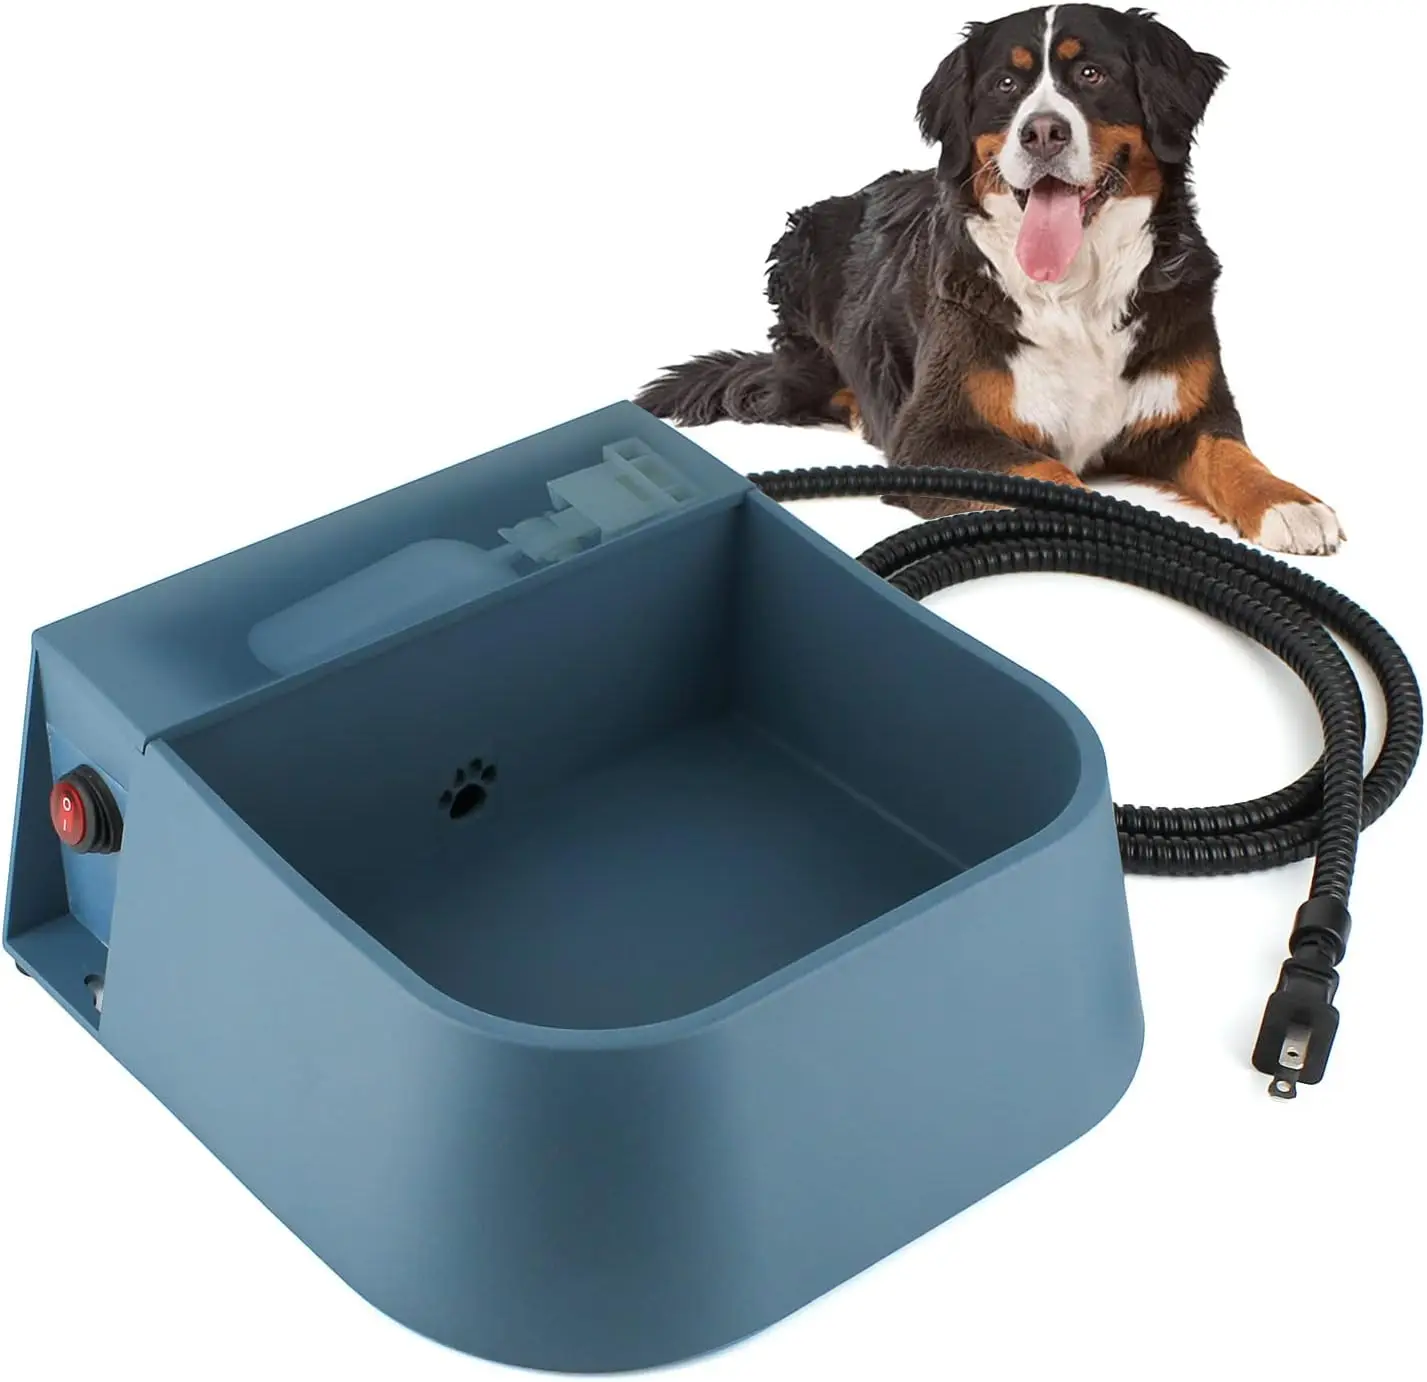 

Heated Automatic Water Bowl for Dogs,Heated Dog Automatic Filling Outdoor Bowl,Heated Auto Waterer for Dog,Cats,Chickens,Animals